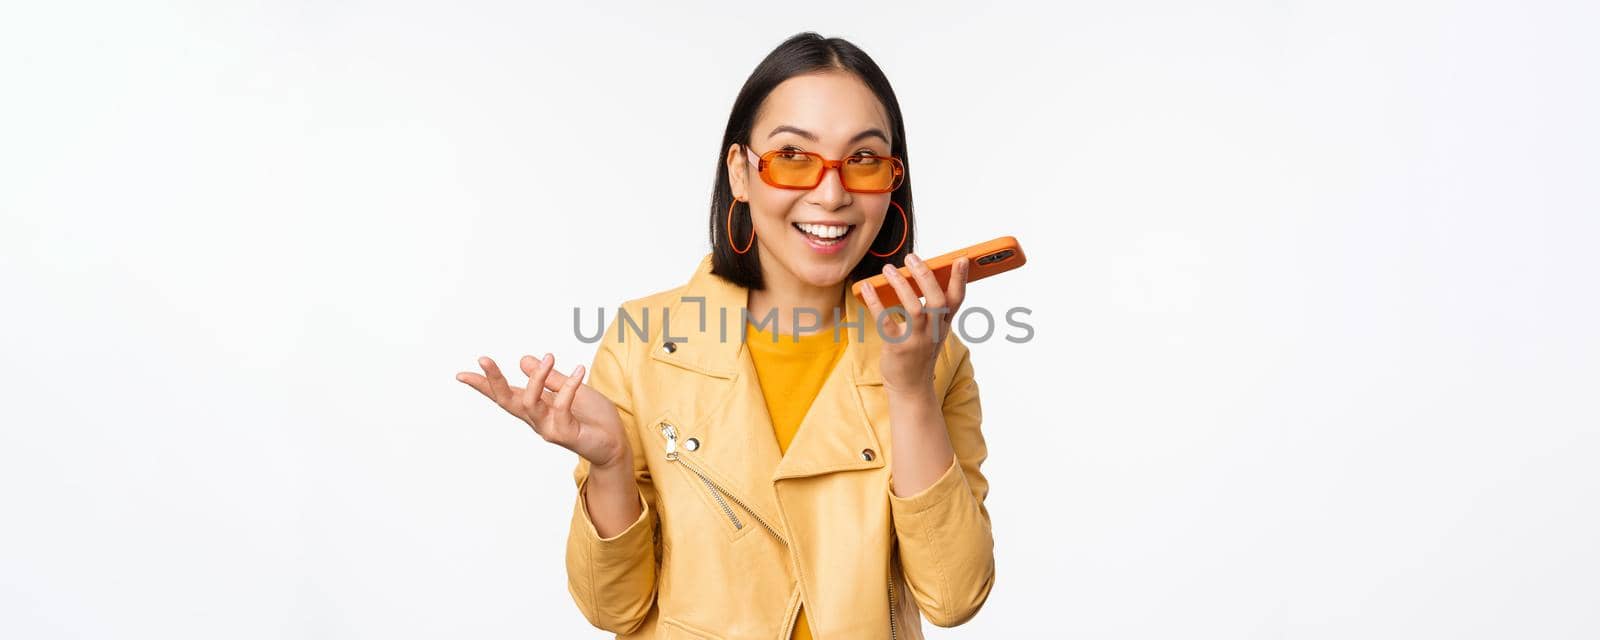 Image of happy asian girl talking on speakerphone, recording, translating her voice with mobile phone app, talking in smartphone dynamic, standing over white background.